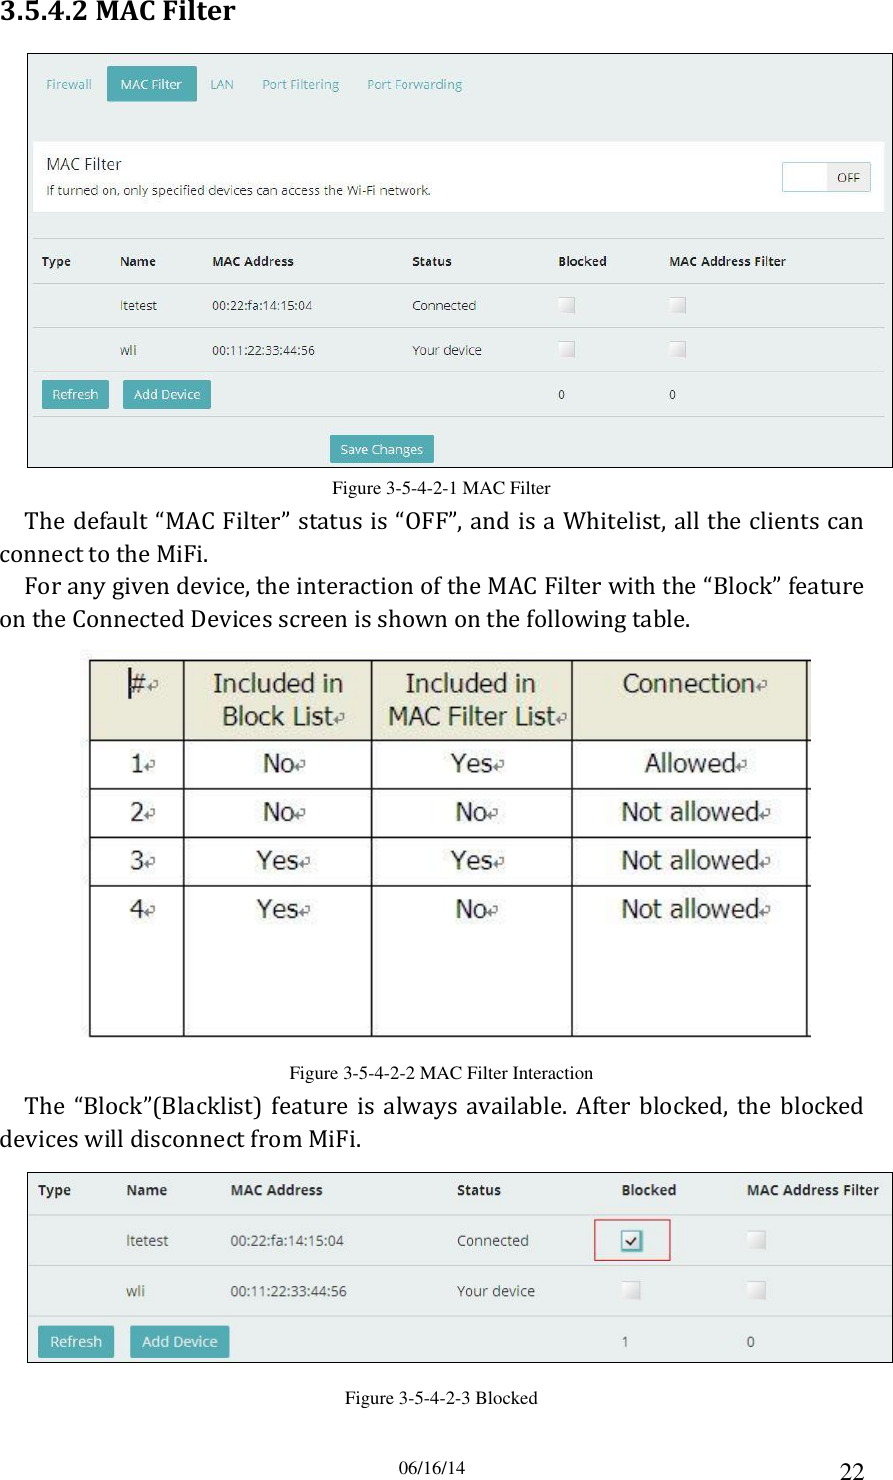 06/16/14 22 3.5.4.2 MAC Filter  Figure 3-5-4-2-1 MAC Filter The default “MAC Filter” status is “OFF”, and is a Whitelist, all the clients can connect to the MiFi. For any given device, the interaction of the MAC Filter with the “Block” feature on the Connected Devices screen is shown on the following table.  Figure 3-5-4-2-2 MAC Filter Interaction The  “Block”(Blacklist)  feature  is  always  available.  After  blocked,  the  blocked devices will disconnect from MiFi.  Figure 3-5-4-2-3 Blocked 